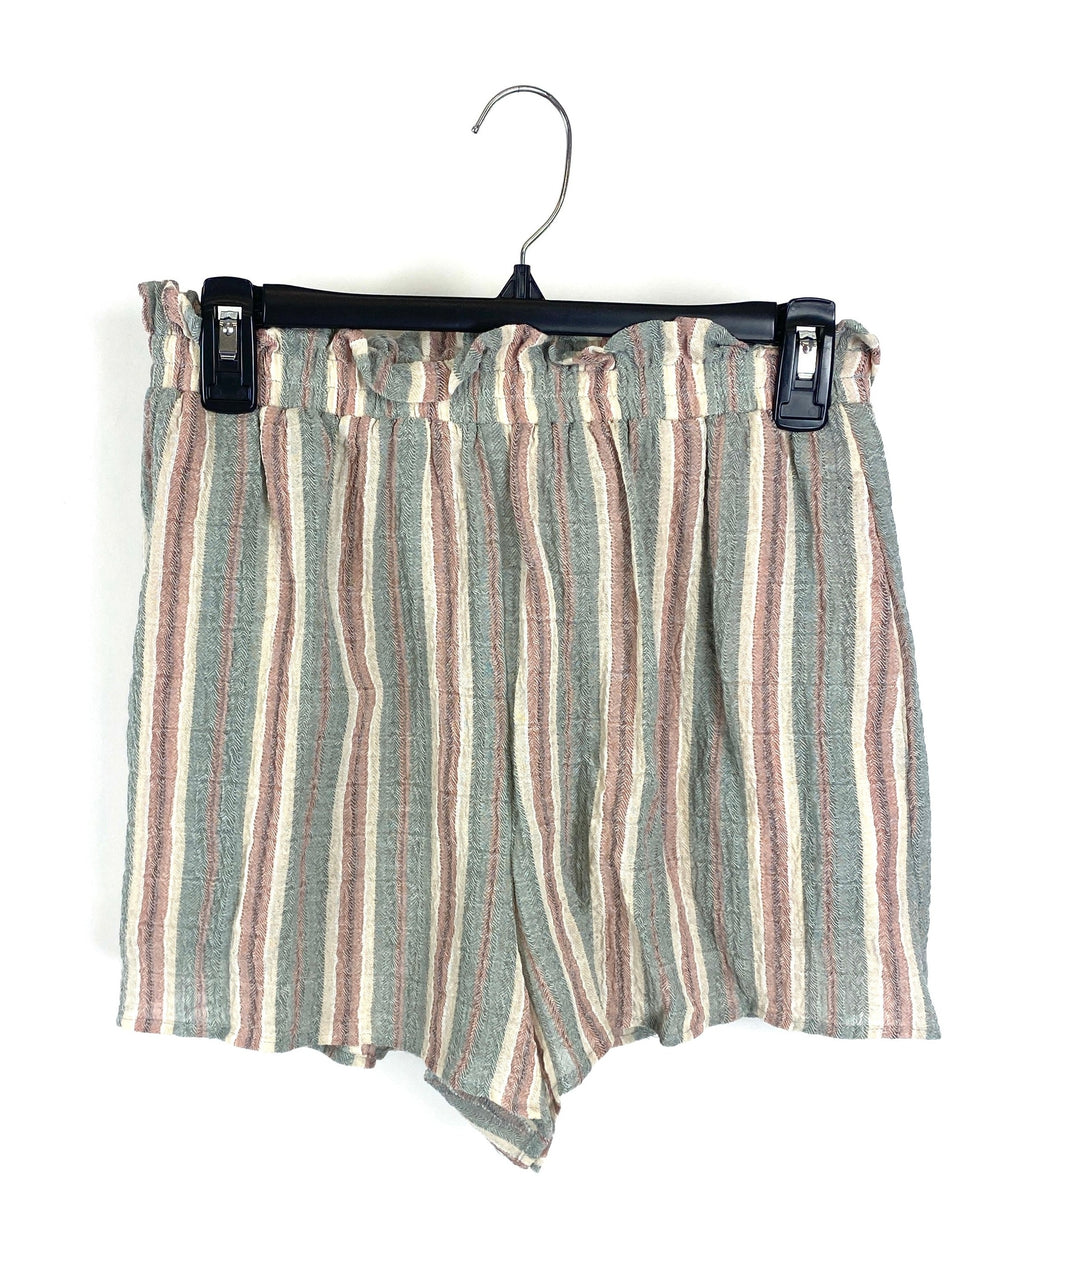 Striped Shorts - Small